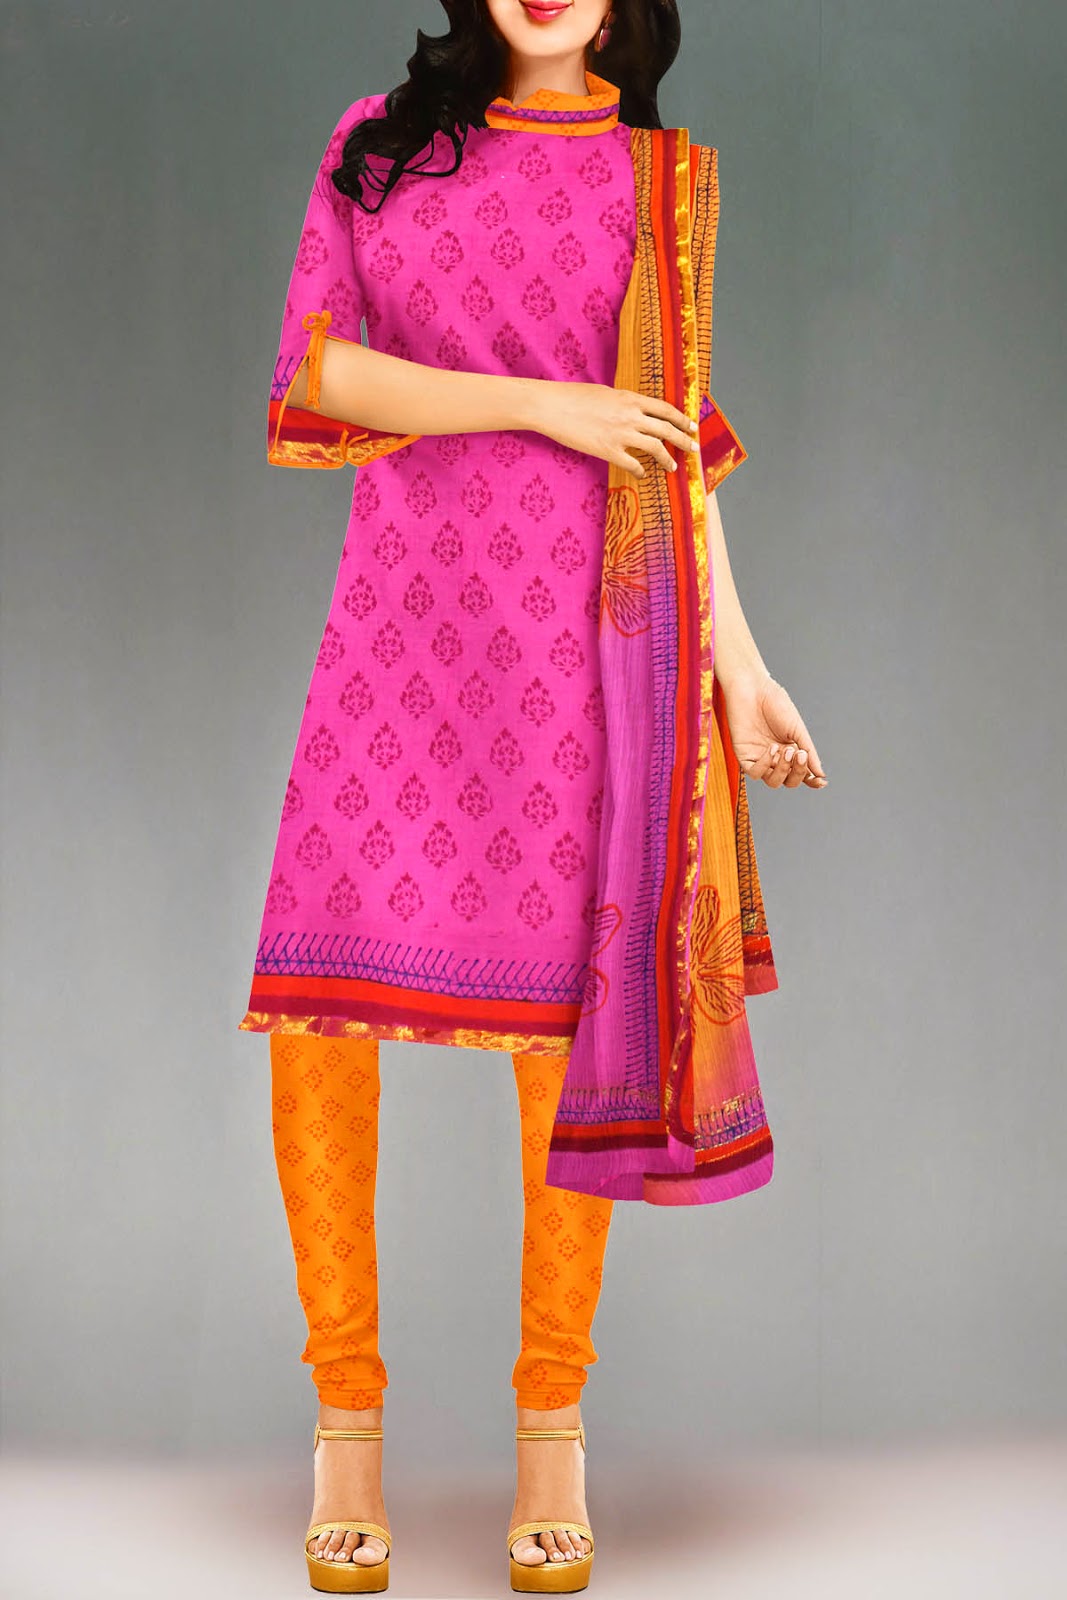 Stylish Cotton sarees and Salwar suits Timetested